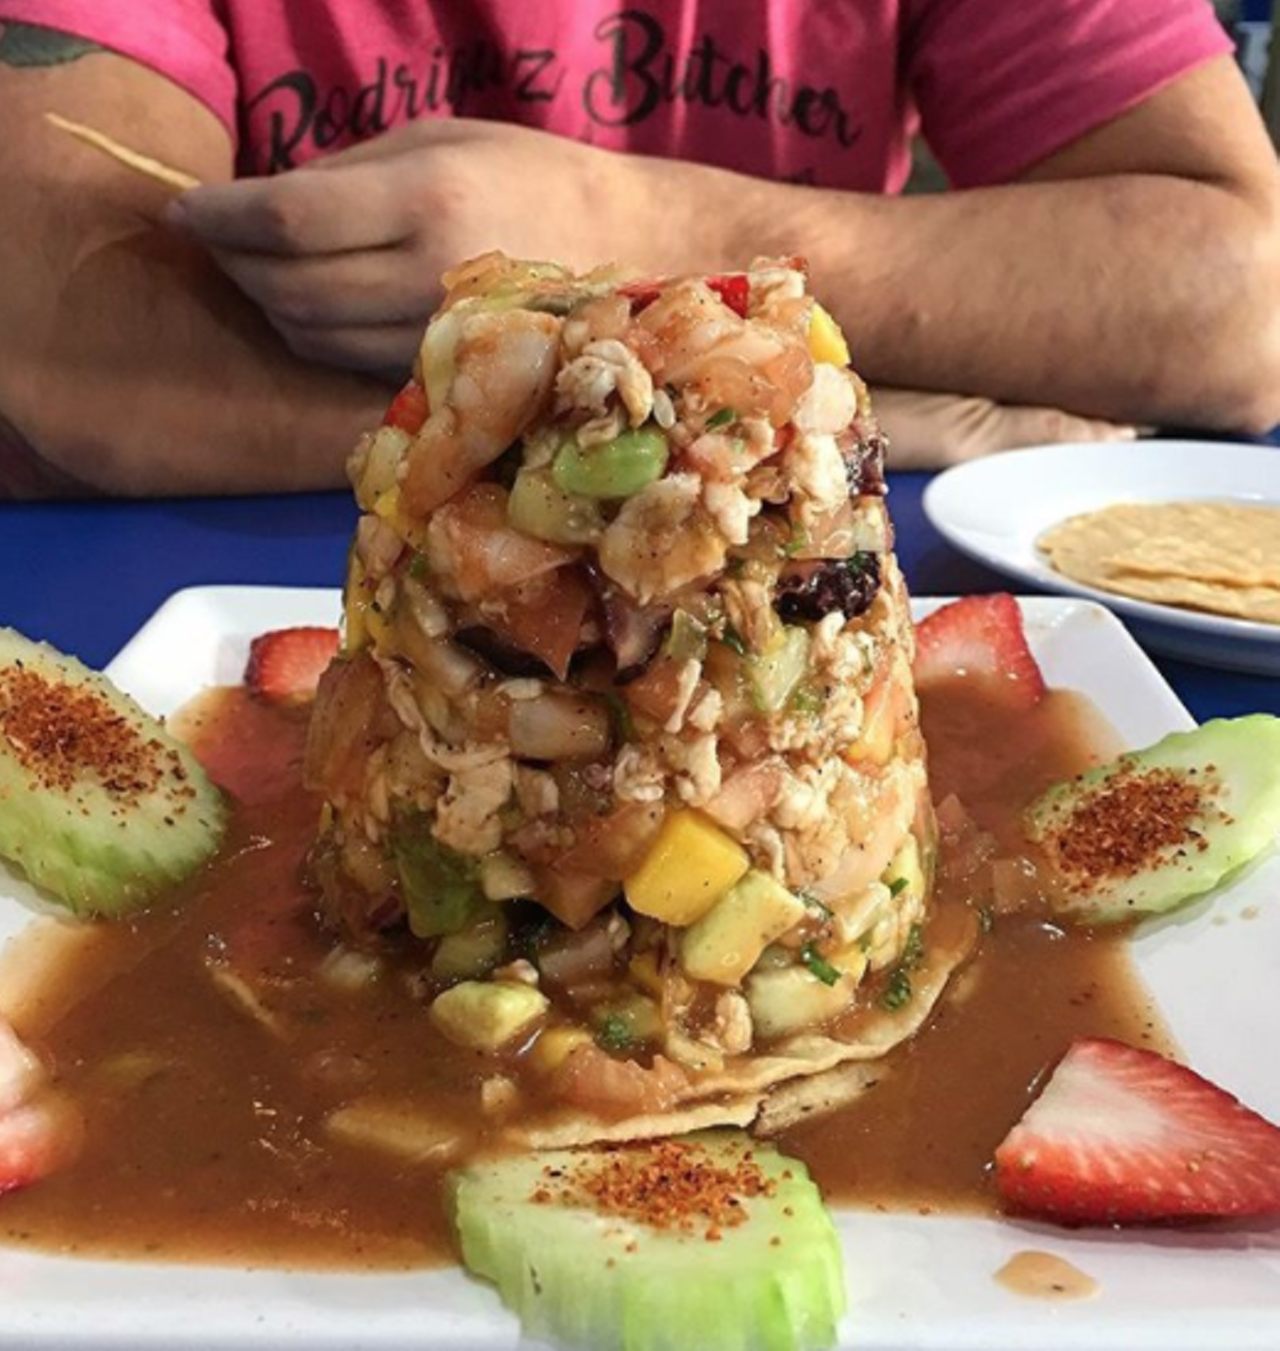 El Bucanero
Multiple locations, bucanerosanantonio.com
Mexican-style seafood. What else do you need to know? With three locations throughout Alamo City, El Bucanero is a prime spot for lunch when you have a bit more time.
Photo via Instagram / tequila_m0ckingbird